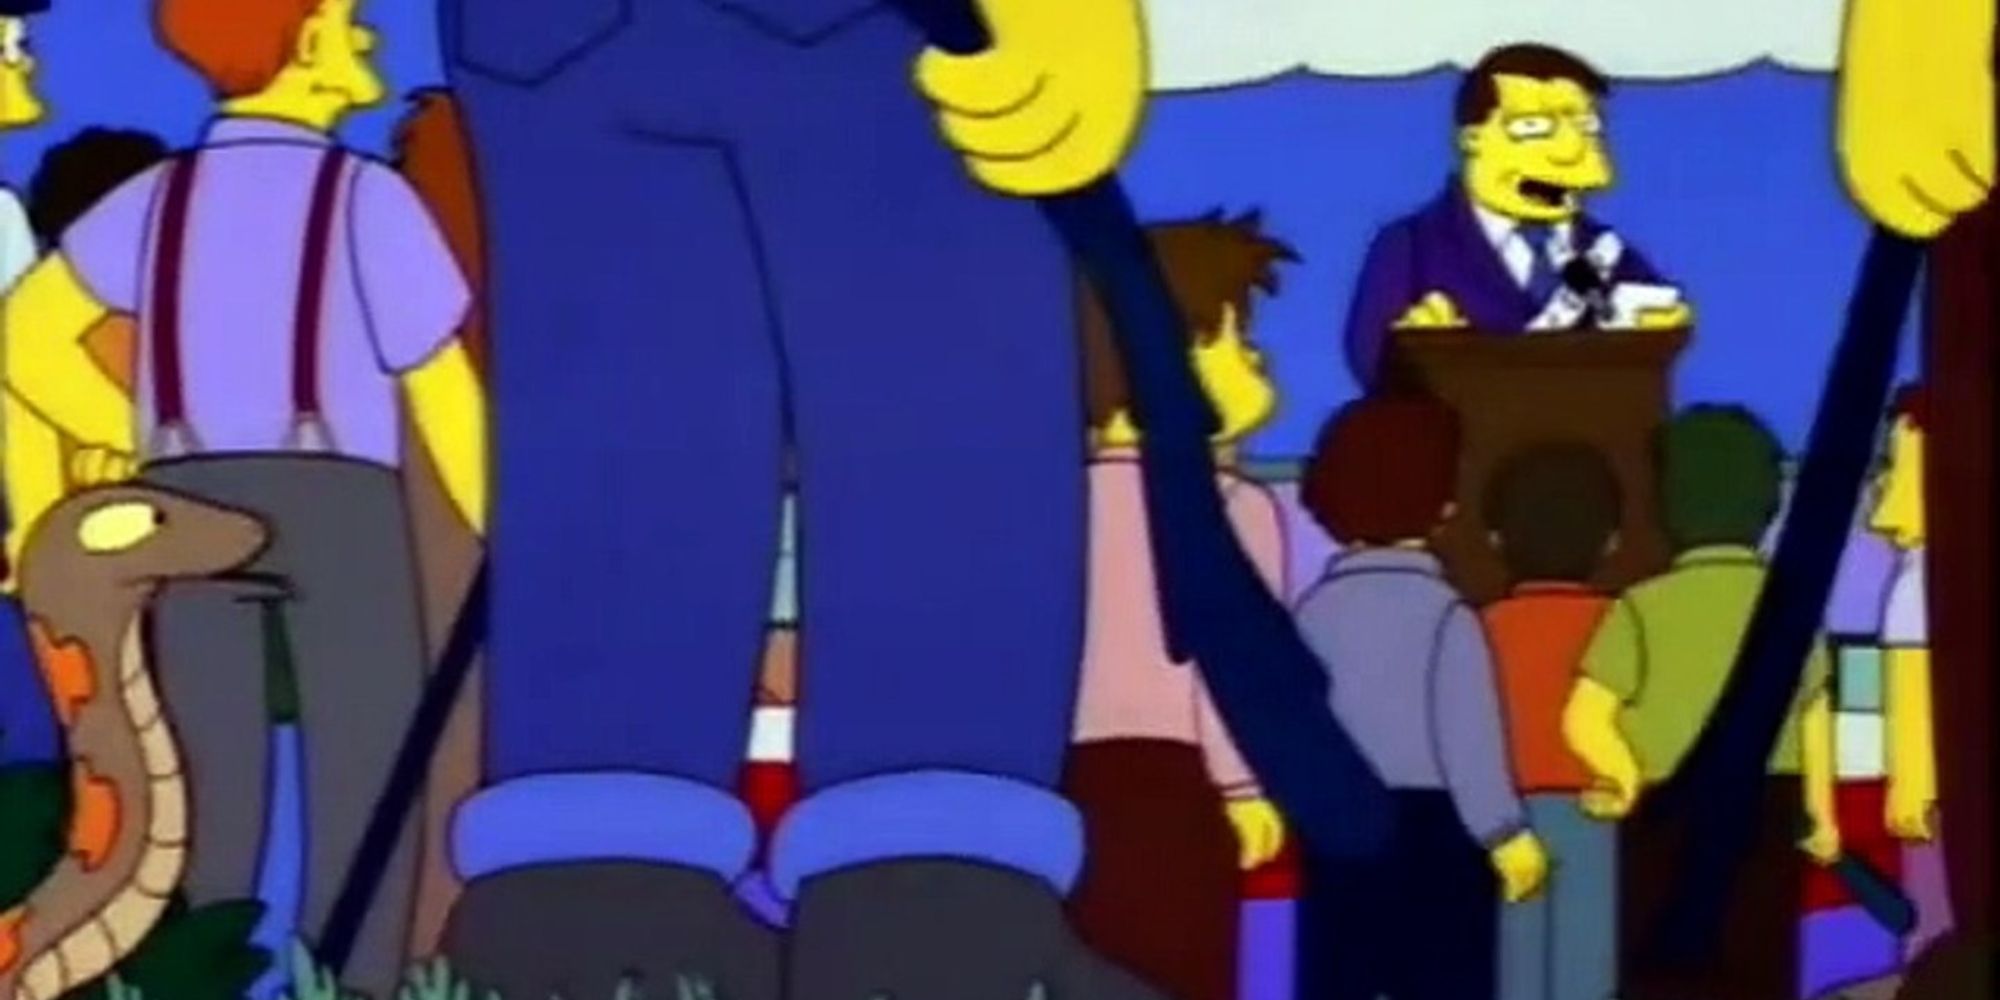 Mayor Quimby and a crowd from The Simpsons Whacking Day